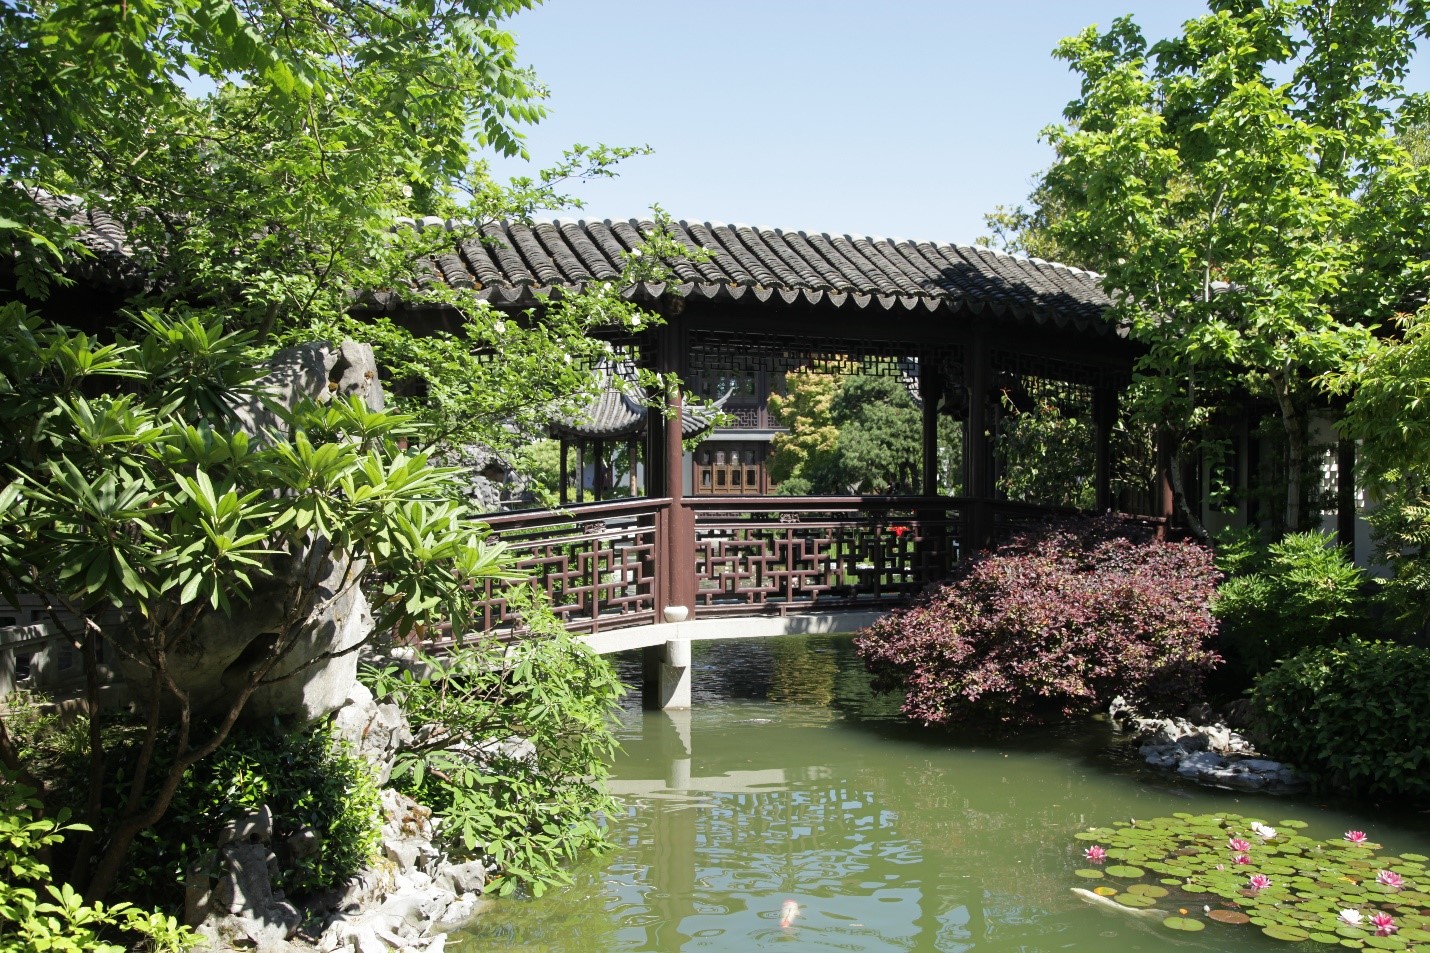 Footbridge surrounded by green foliage at the Chinese Garden